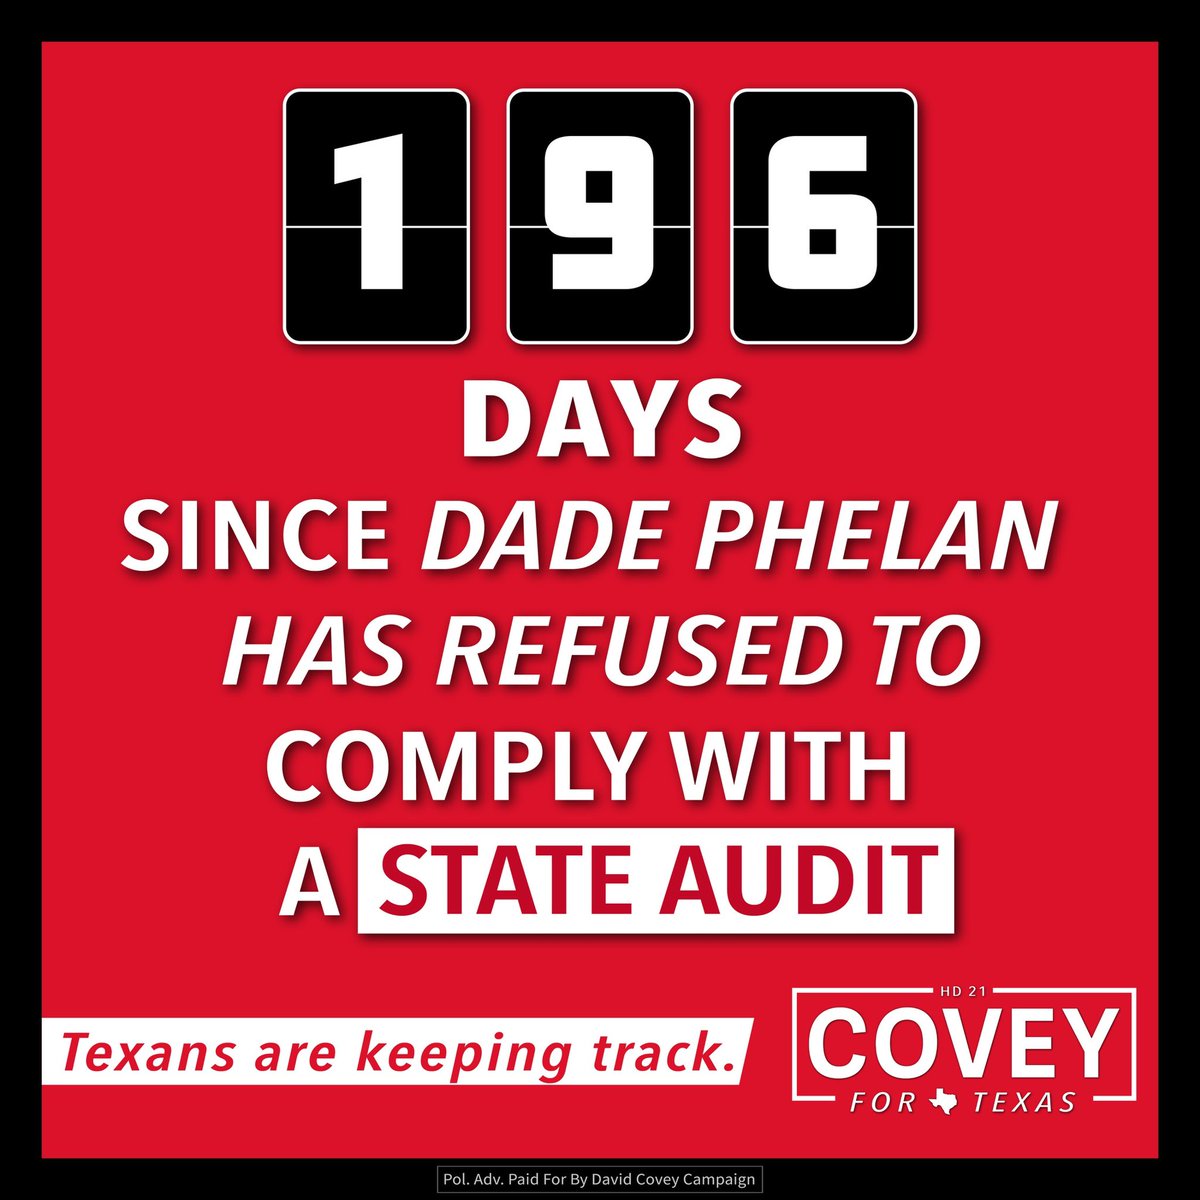 It’s been 196 days, and Dade Phelan still has not complied with a state audit on the sham impeachment of AG Paxton. Dade wants to hide the costs from taxpayers. What’s he afraid of? What’s he hiding?